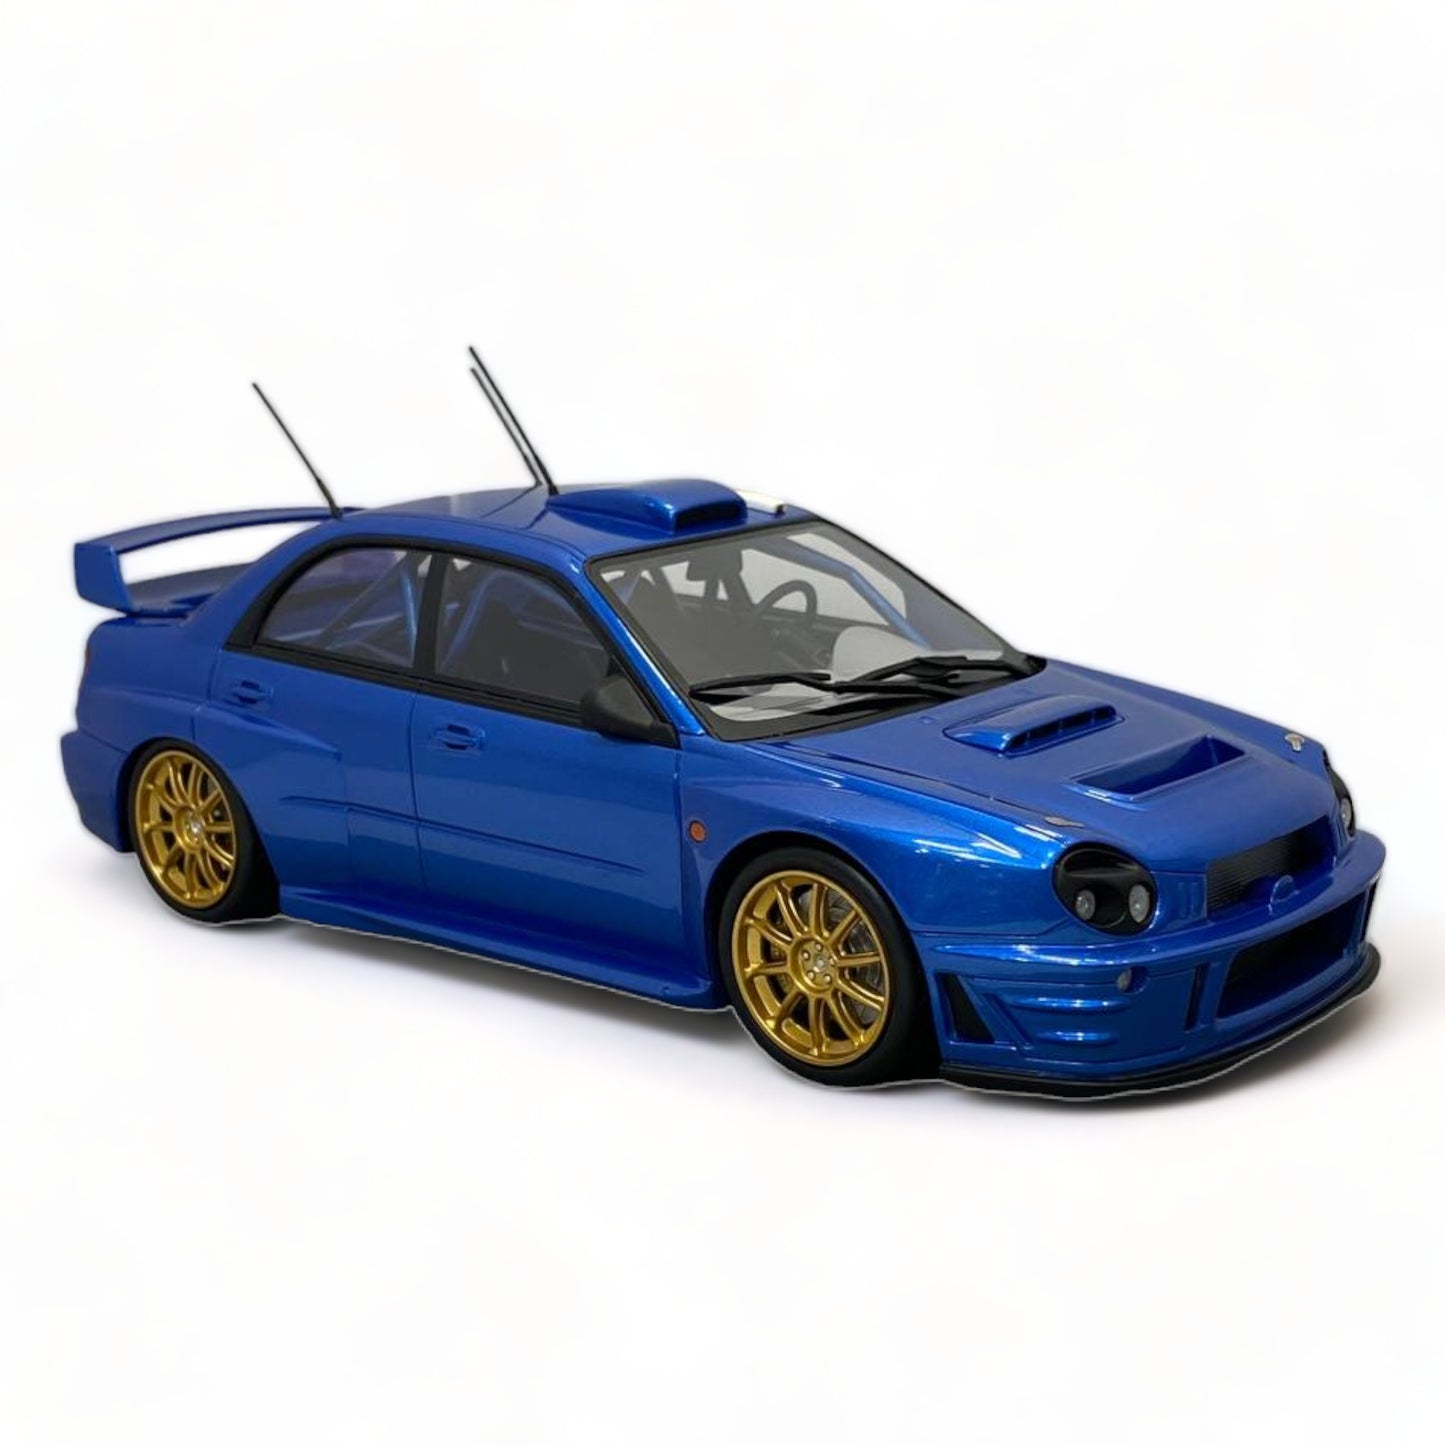 1/18 Diecast TOP MARQUES Subaru S7 Ready To Race Blue 2002